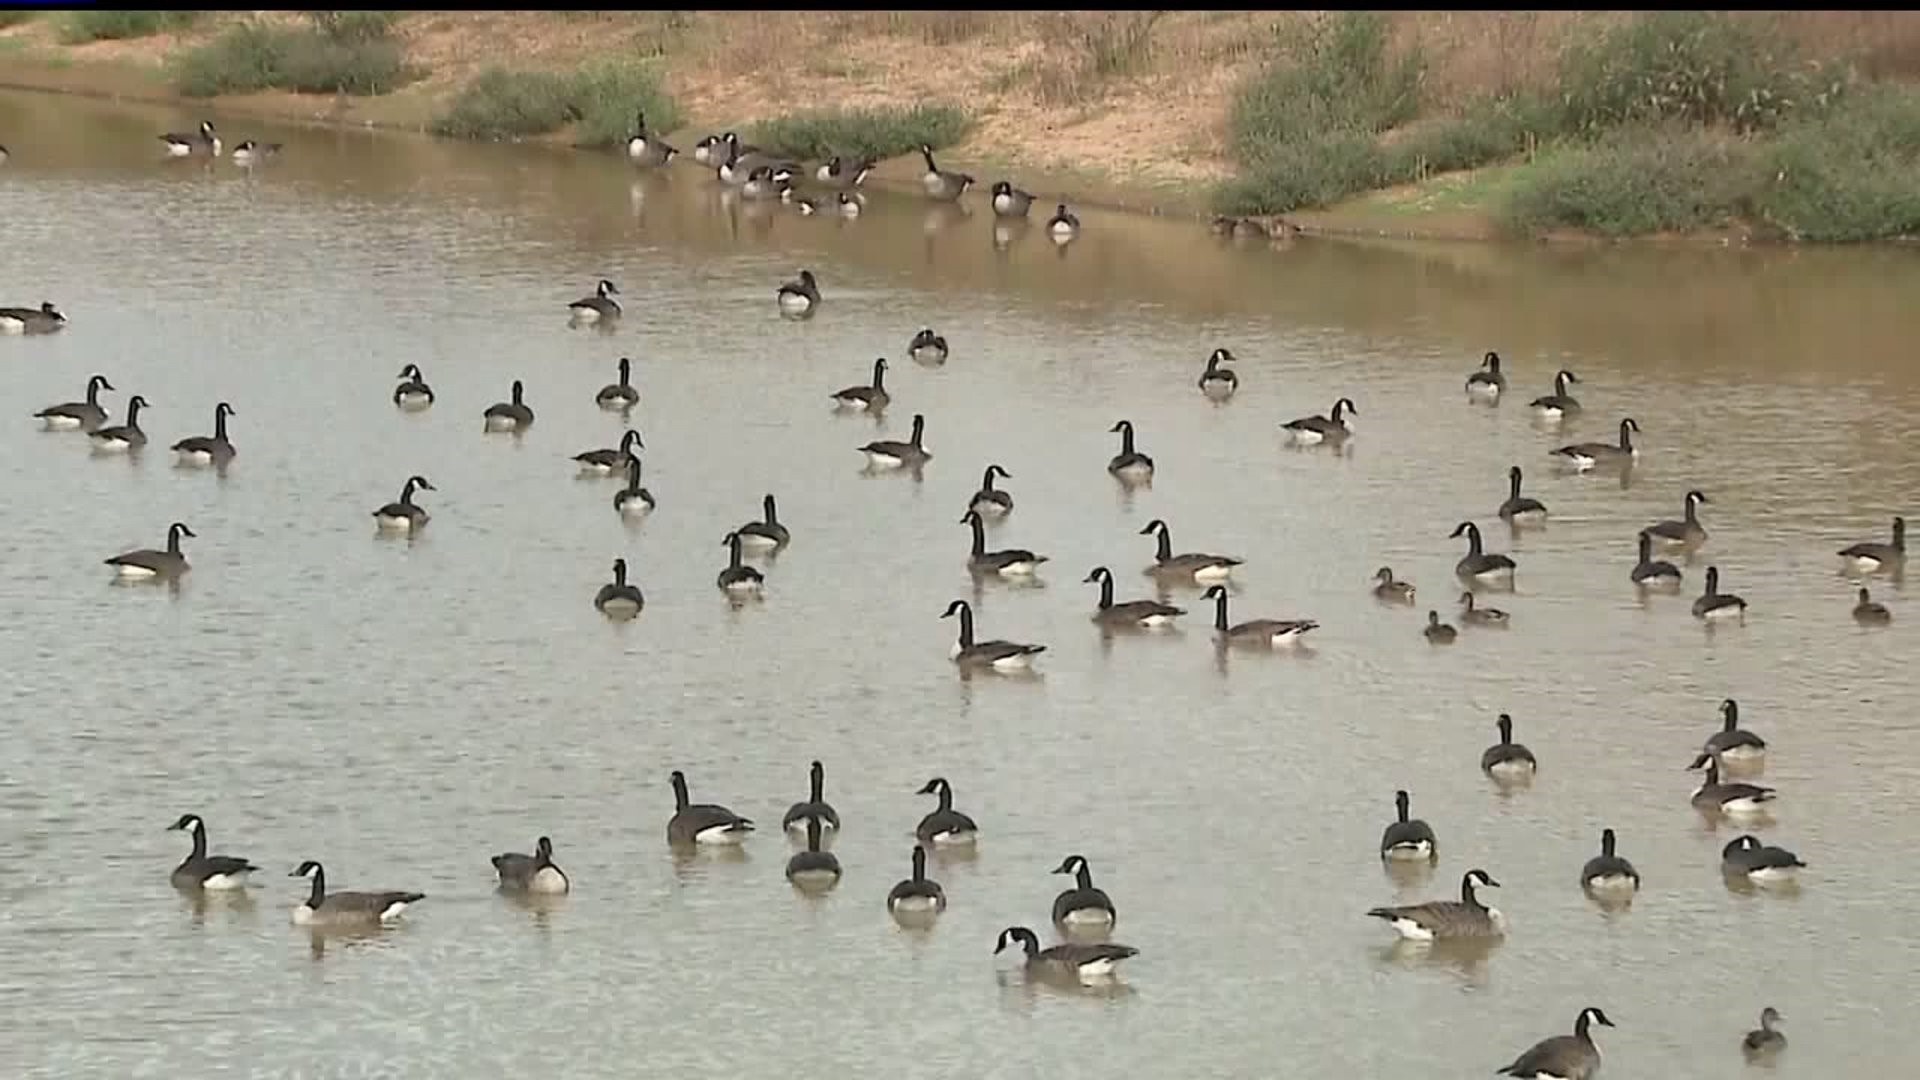 Golf course using hunters to get rid of geese